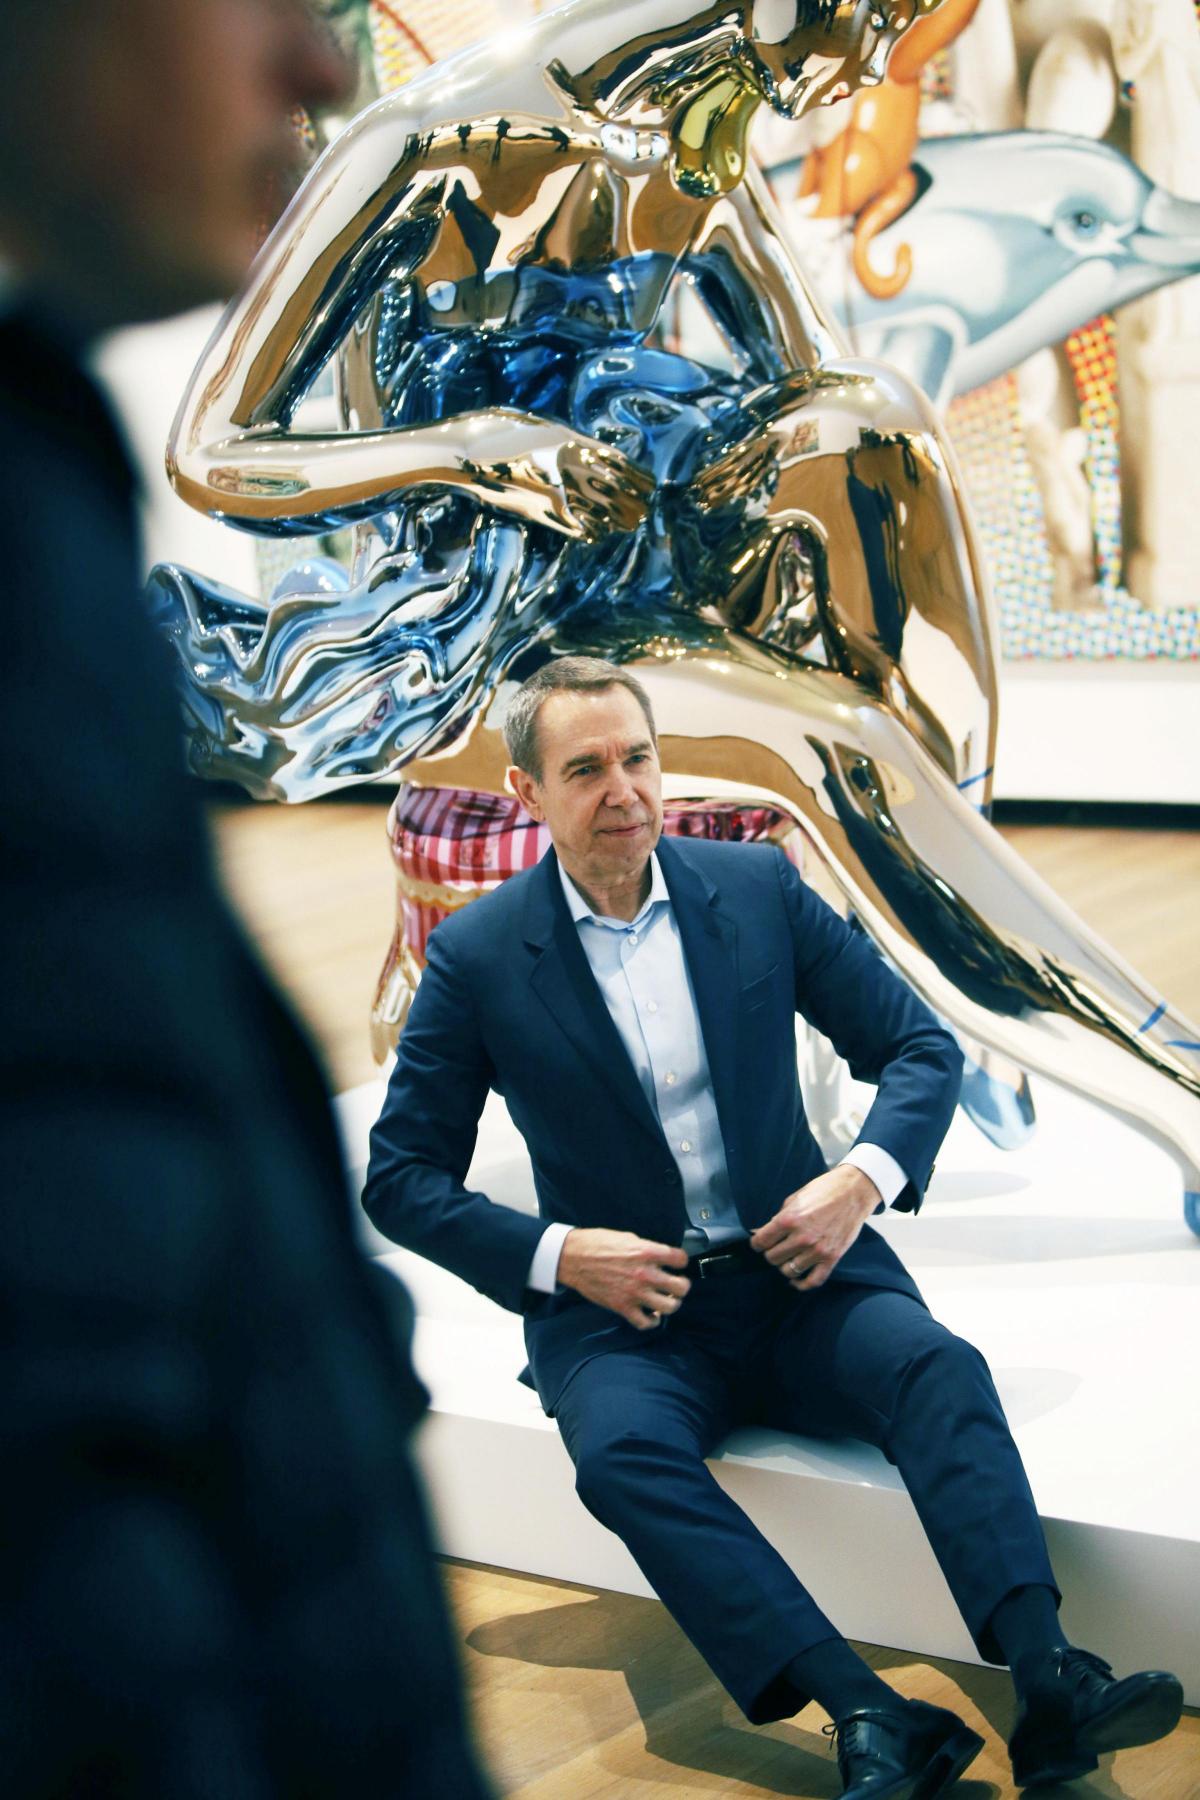 Jeff Koons to display artworks at Oxford exhibition - BBC News